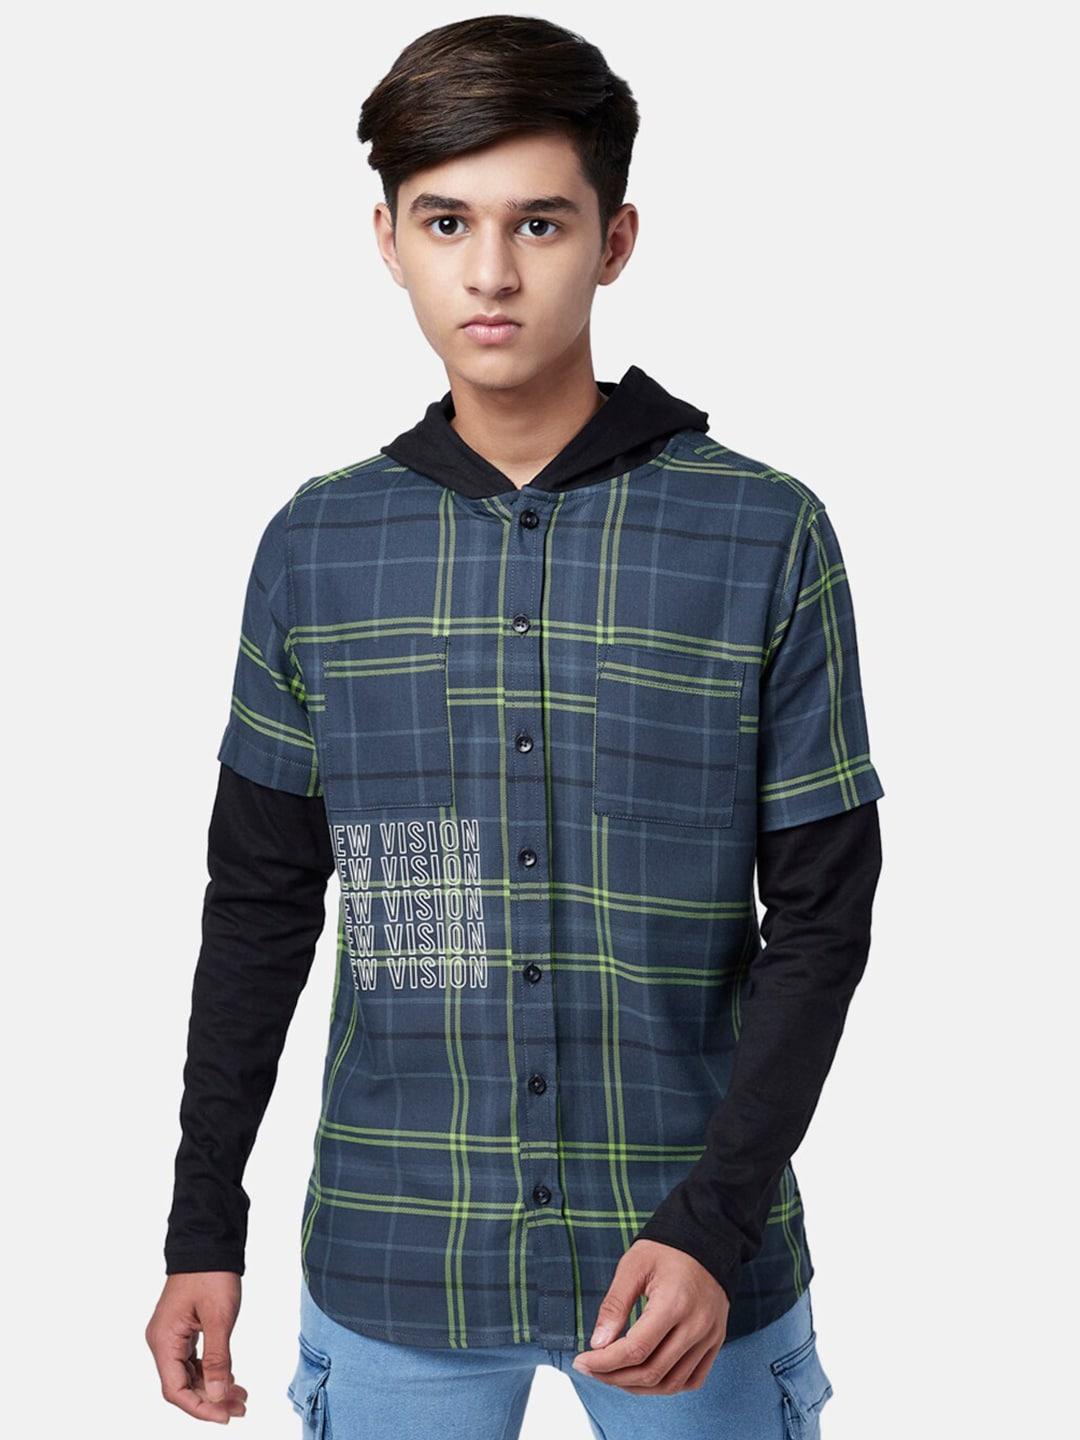 coolsters by pantaloons boys blue & green checked cotton casual shirt